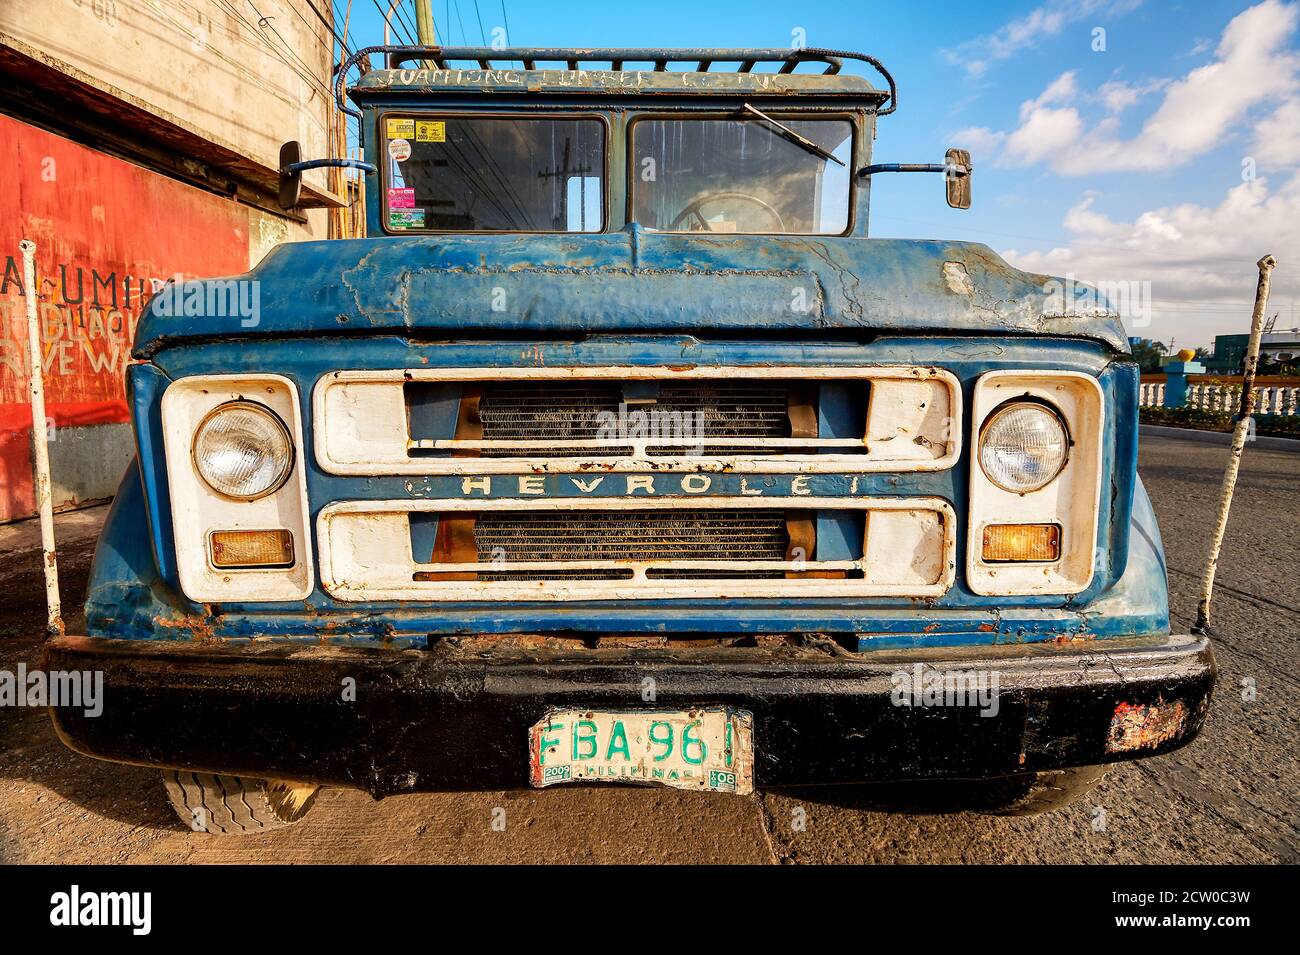 Front low angle view of an old blue colored rusty dirty Chevrolet cargo truck parked along a road in Iloilo City, Philippines Stock Photo